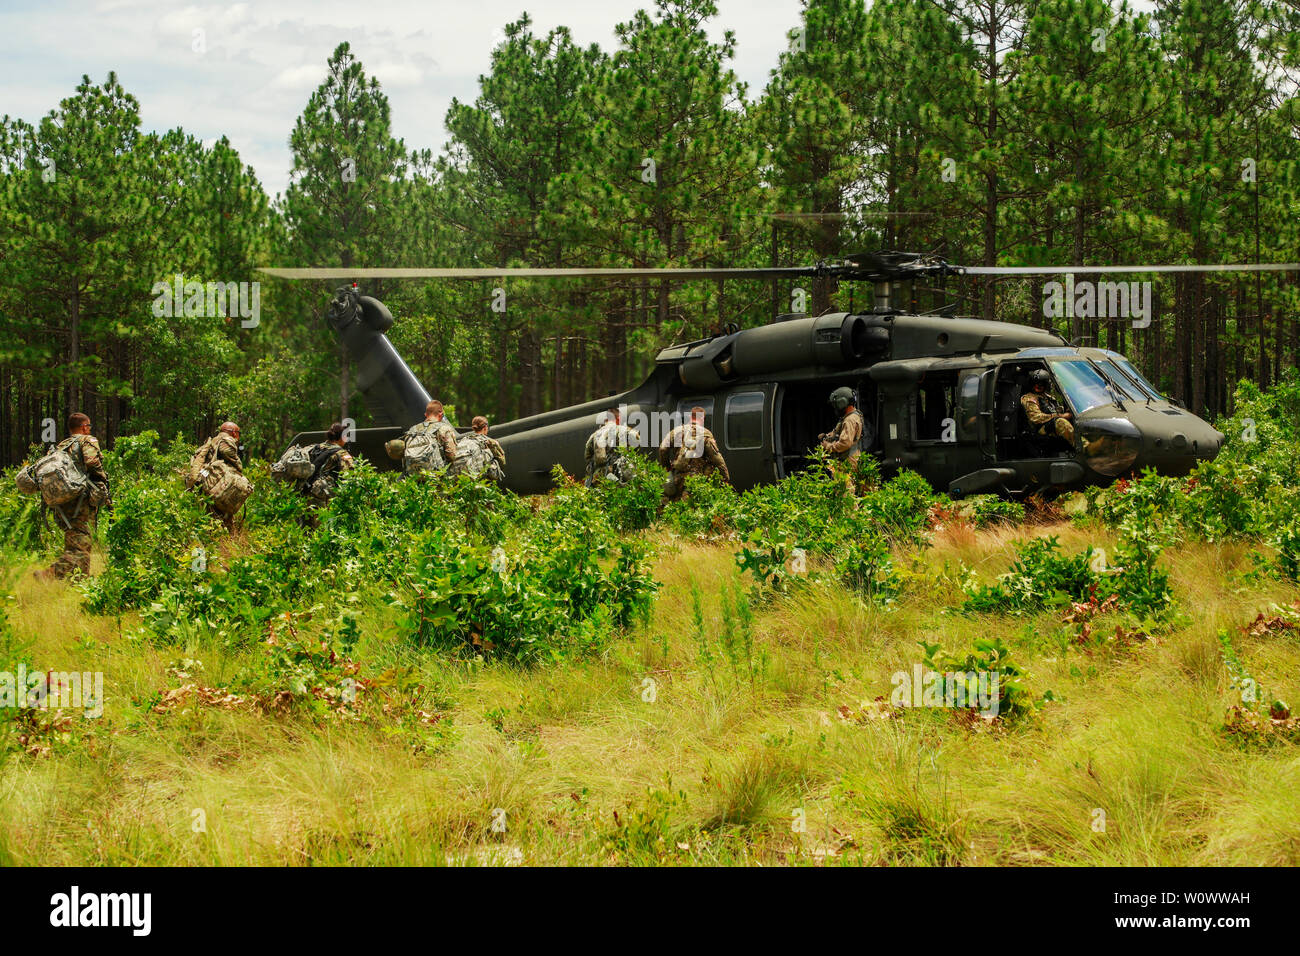 U.S. Army Reserve Soldiers board a UH-60 Blackhawk leaving an Access Control Point event representing multiple commands at the 2019 U.S. Army Reserve Best Warrior Competition at Fort Bragg, N.C. June 26, 2019. This year’s Best Warrior Competition will determine the top noncommissioned officer and junior enlisted Soldier who will represent the U.S. Army Reserve in the Department of the Army Best Warrior Competition later this year at Fort A.P. Hill, Va. (U.S. Army Reserve photo by Spc. Cody Roberts) (Released) Stock Photo